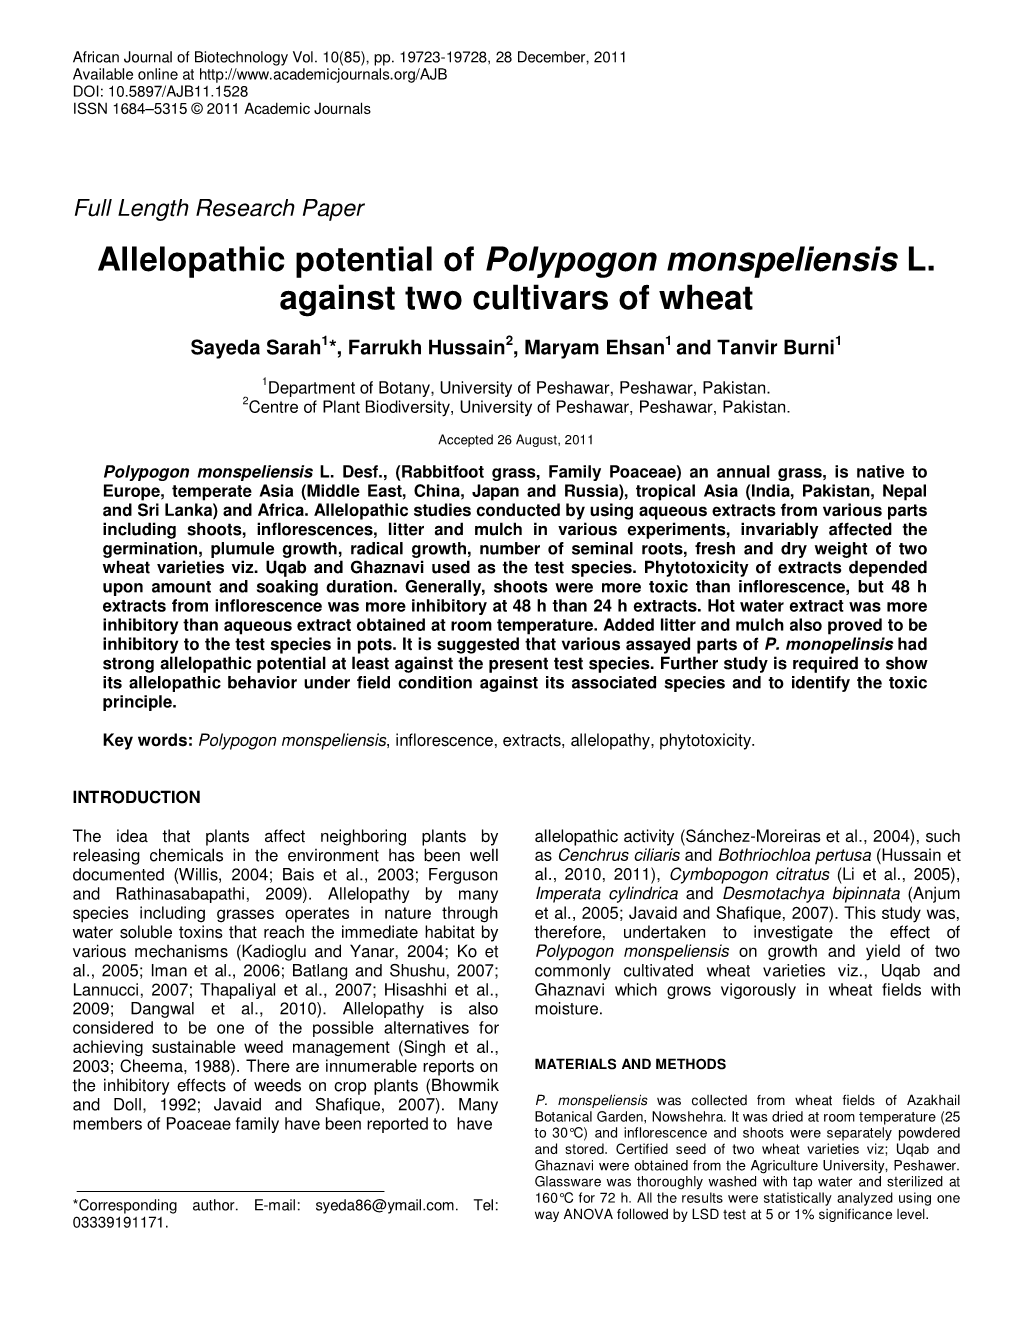 Allelopathic Potential of Polypogon Monspeliensis L. Against Two Cultivars of Wheat